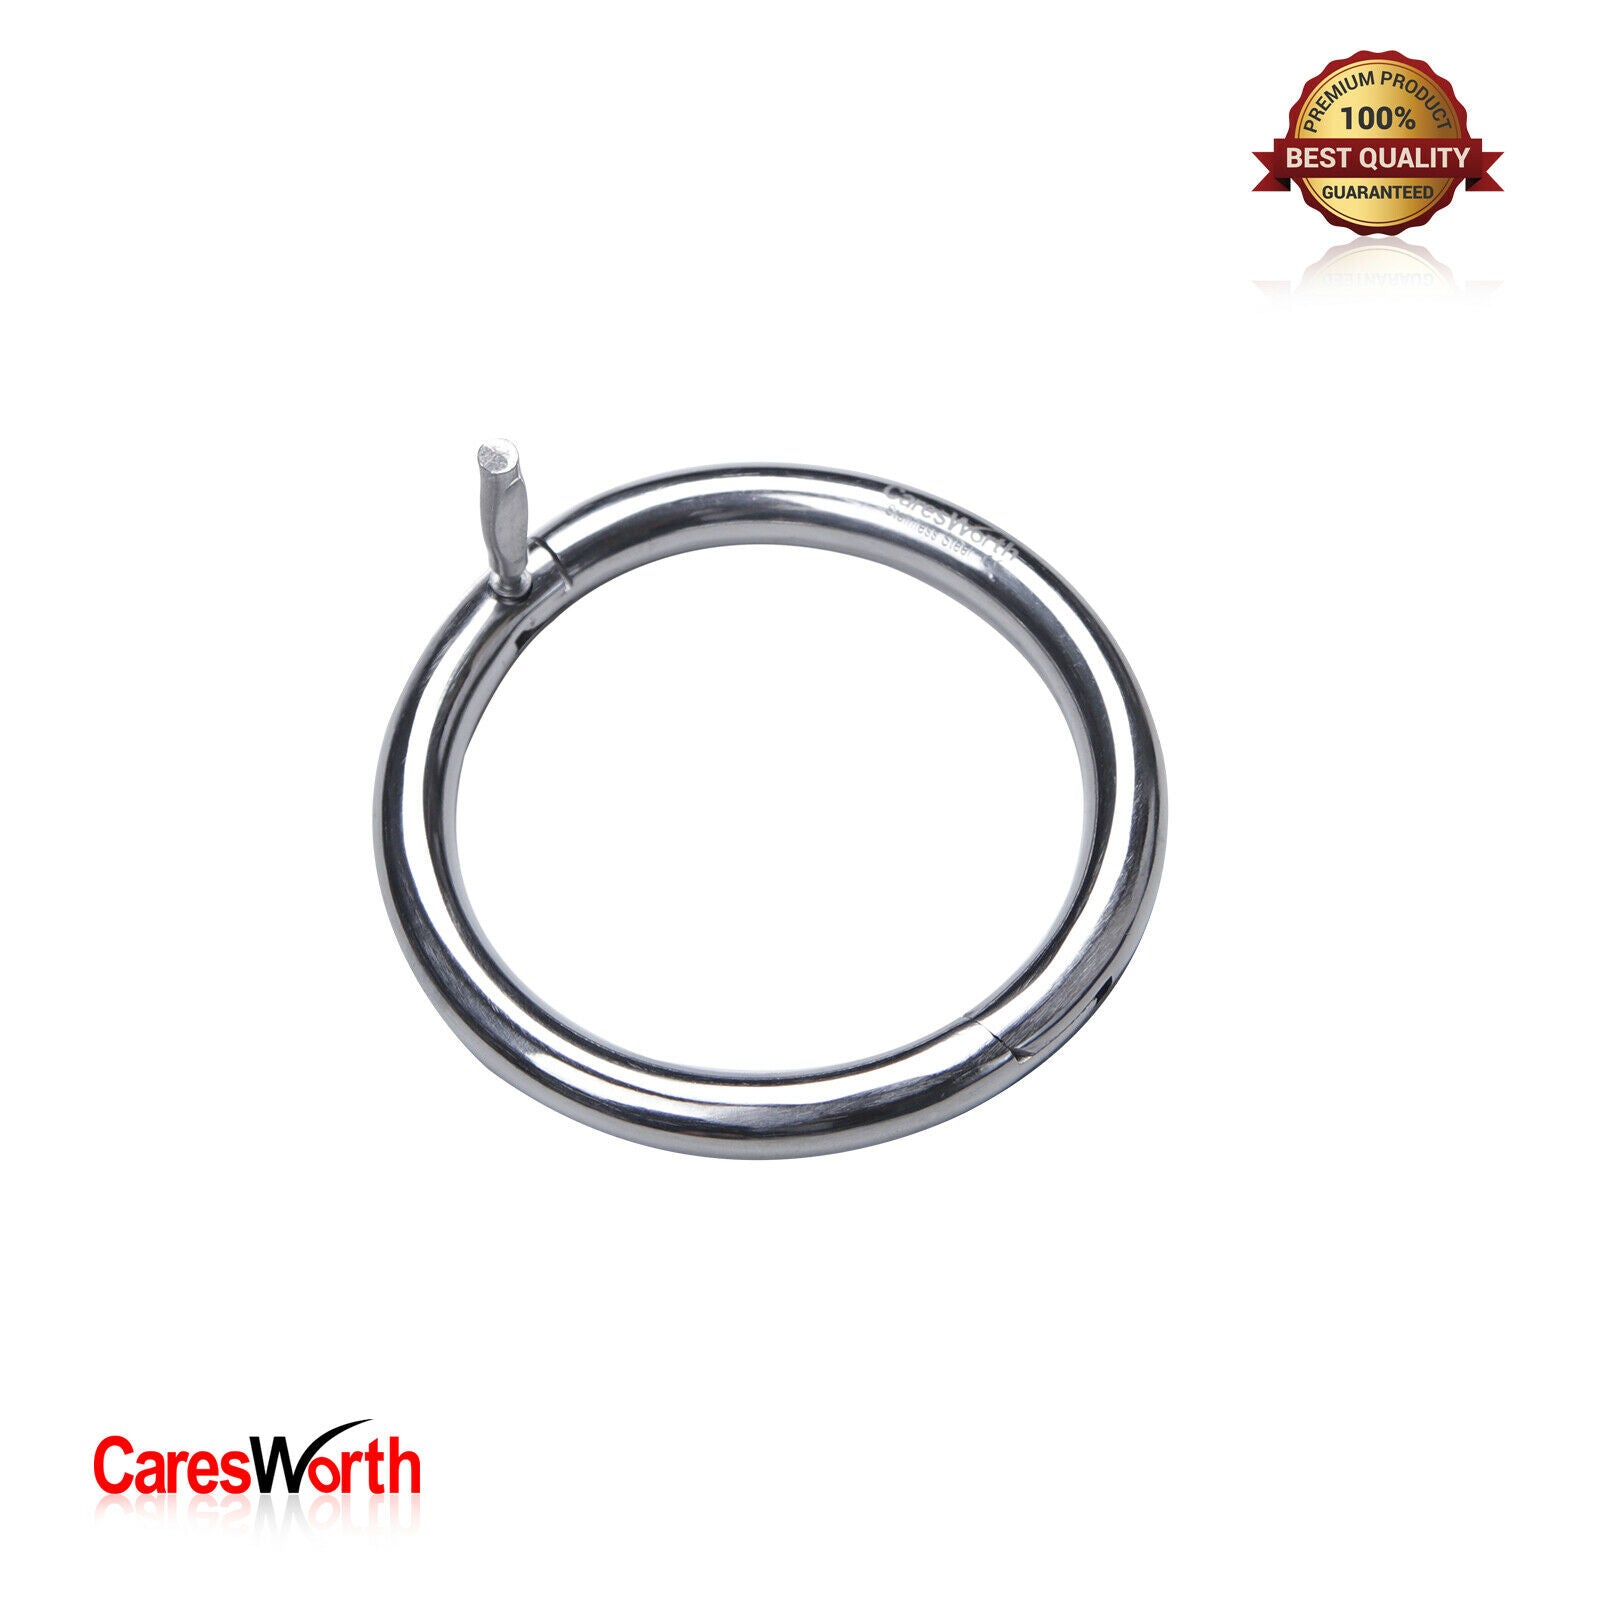 CaresWorth Bull Cow Nose Steel Ring with Free Key Veterinary Cattle 3